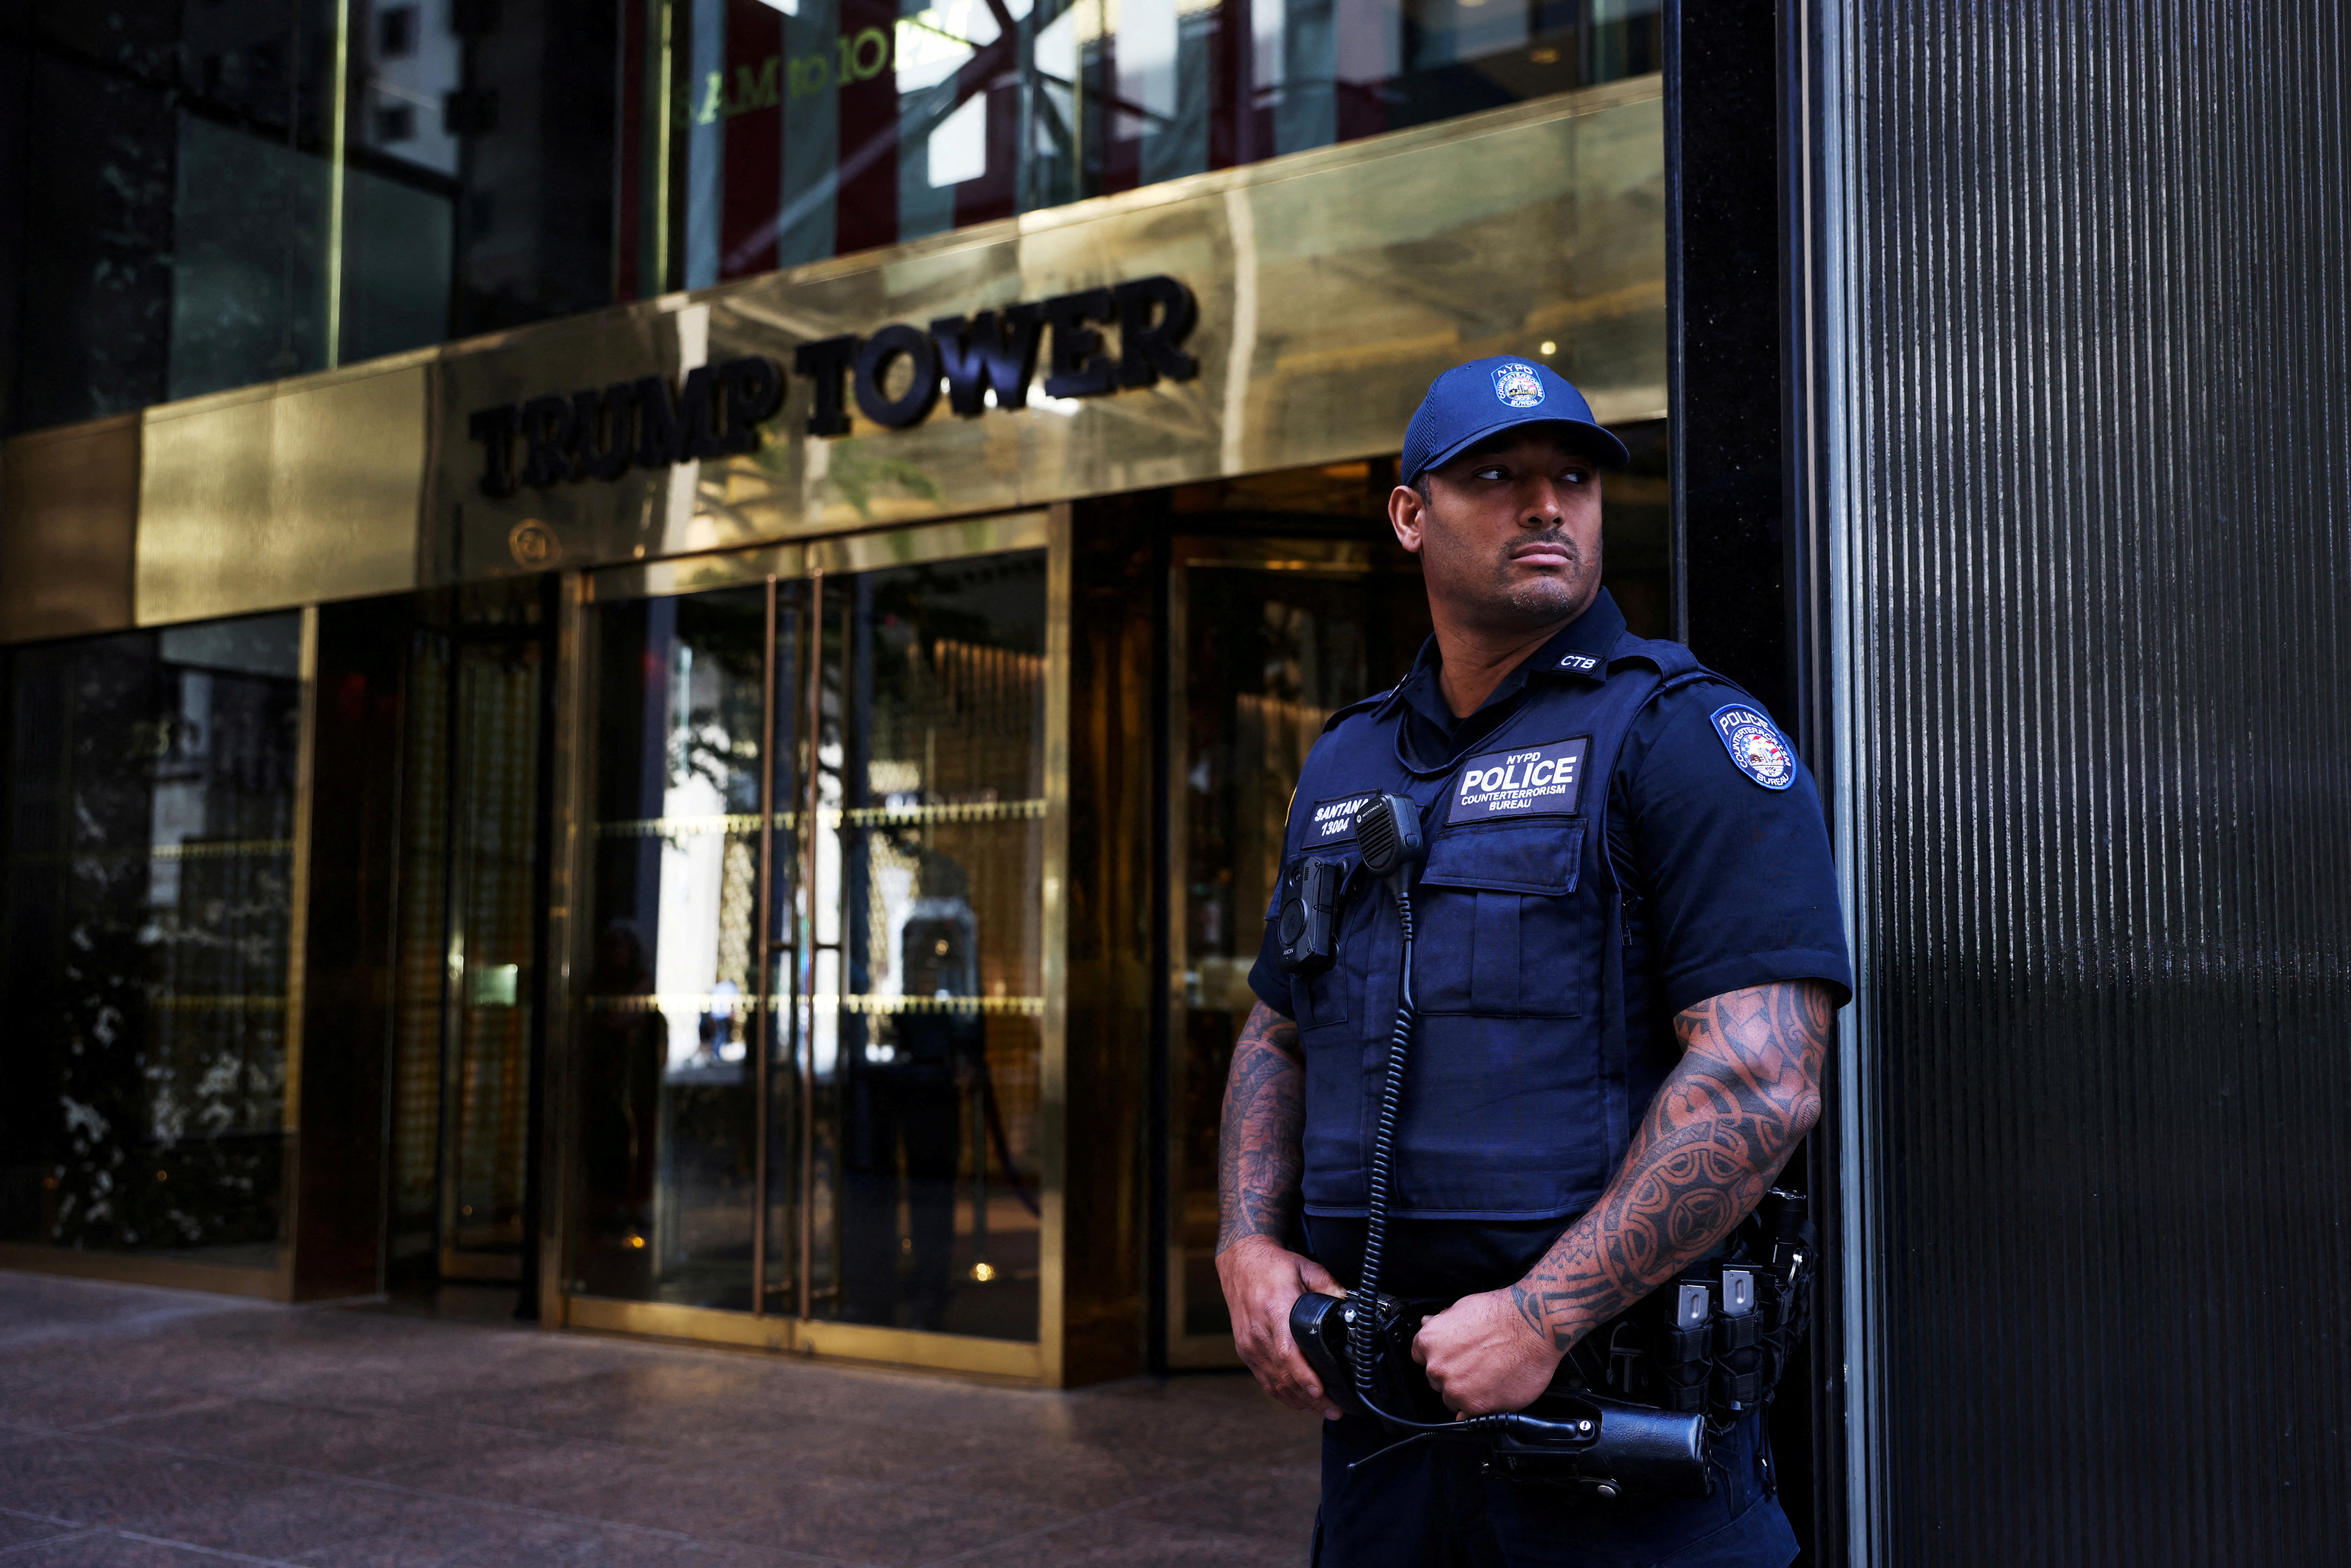 Trump Tower after former U.S. President Donald Trump said that FBI agents raided his Mar-a-Lago home, in Manhattan, New York City